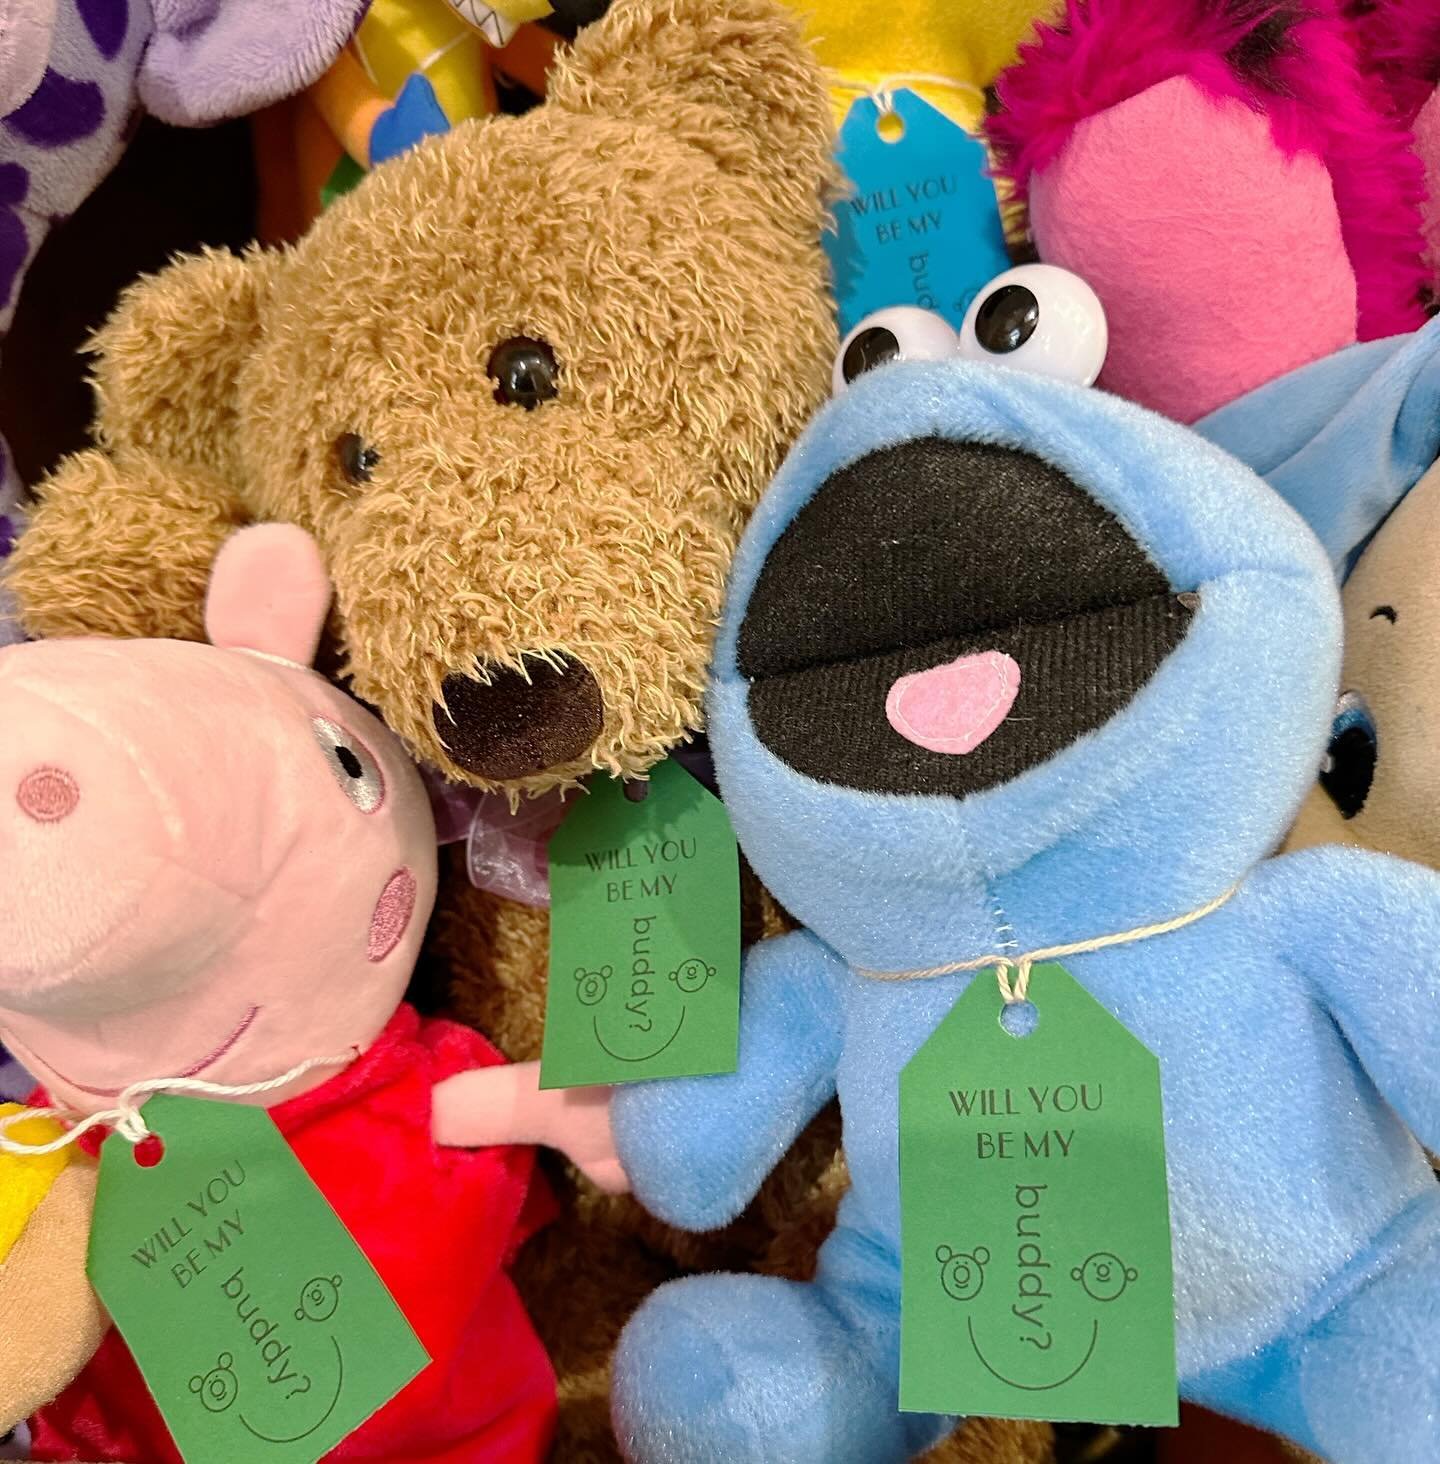 Need a new special friend at your house? Our &lsquo;Adopt a Buddy&rsquo; scheme is up and running. Pop past our office to find your perfect companion today! #adoptabuddy #community #neighbourhoodhouses #neighbourhoodhousesvictoria